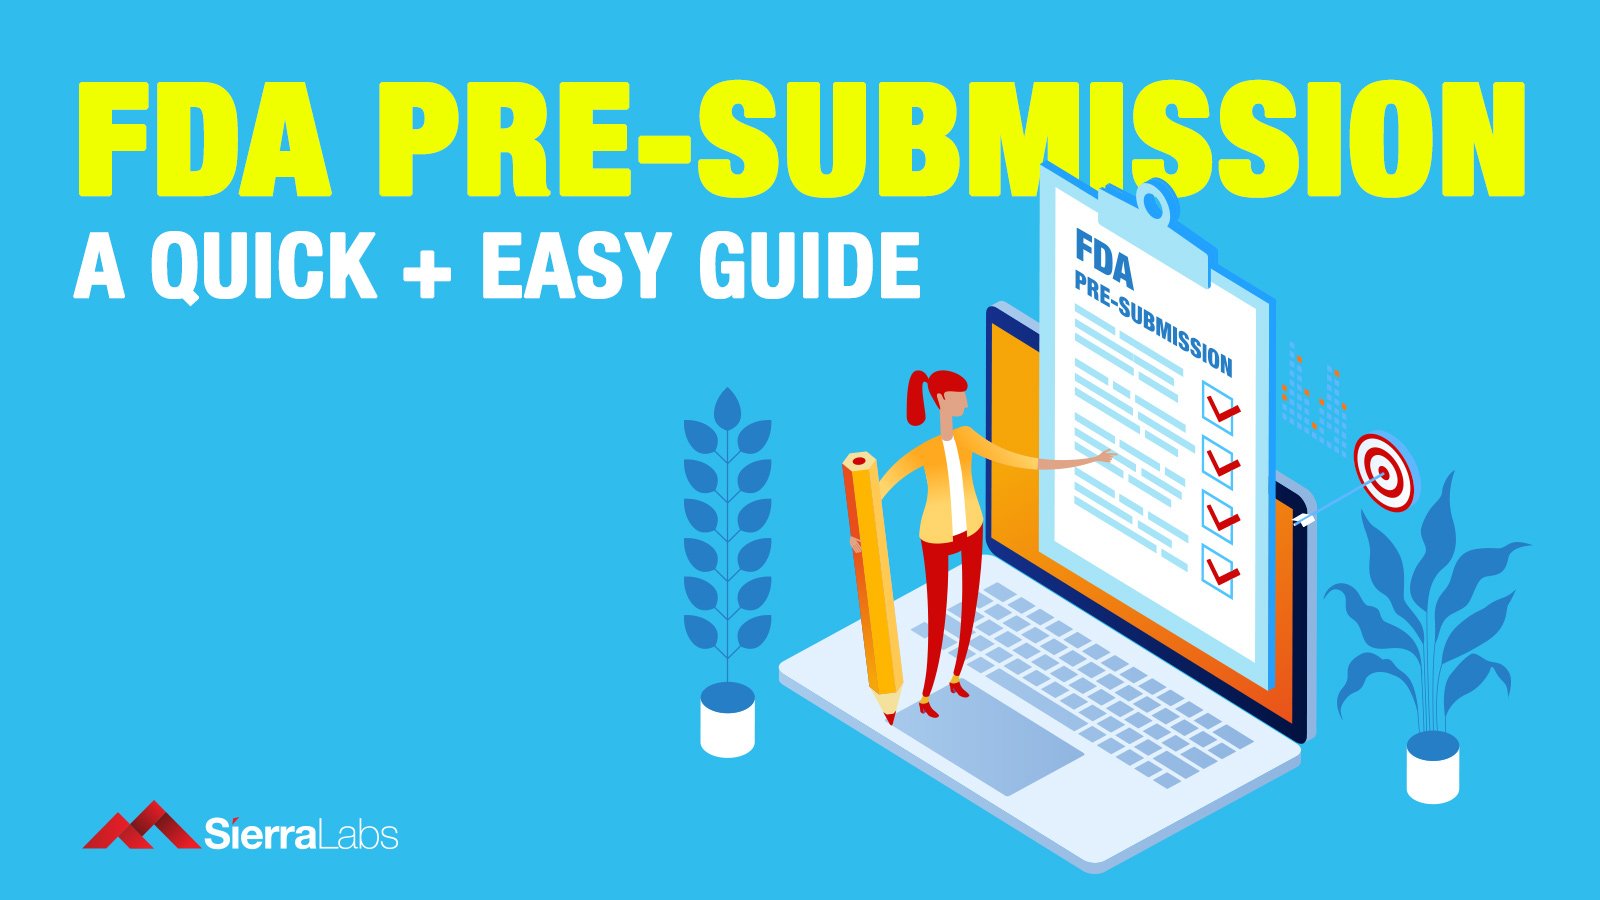 A Quick & Easy Guide to FDA Pre-Submissions